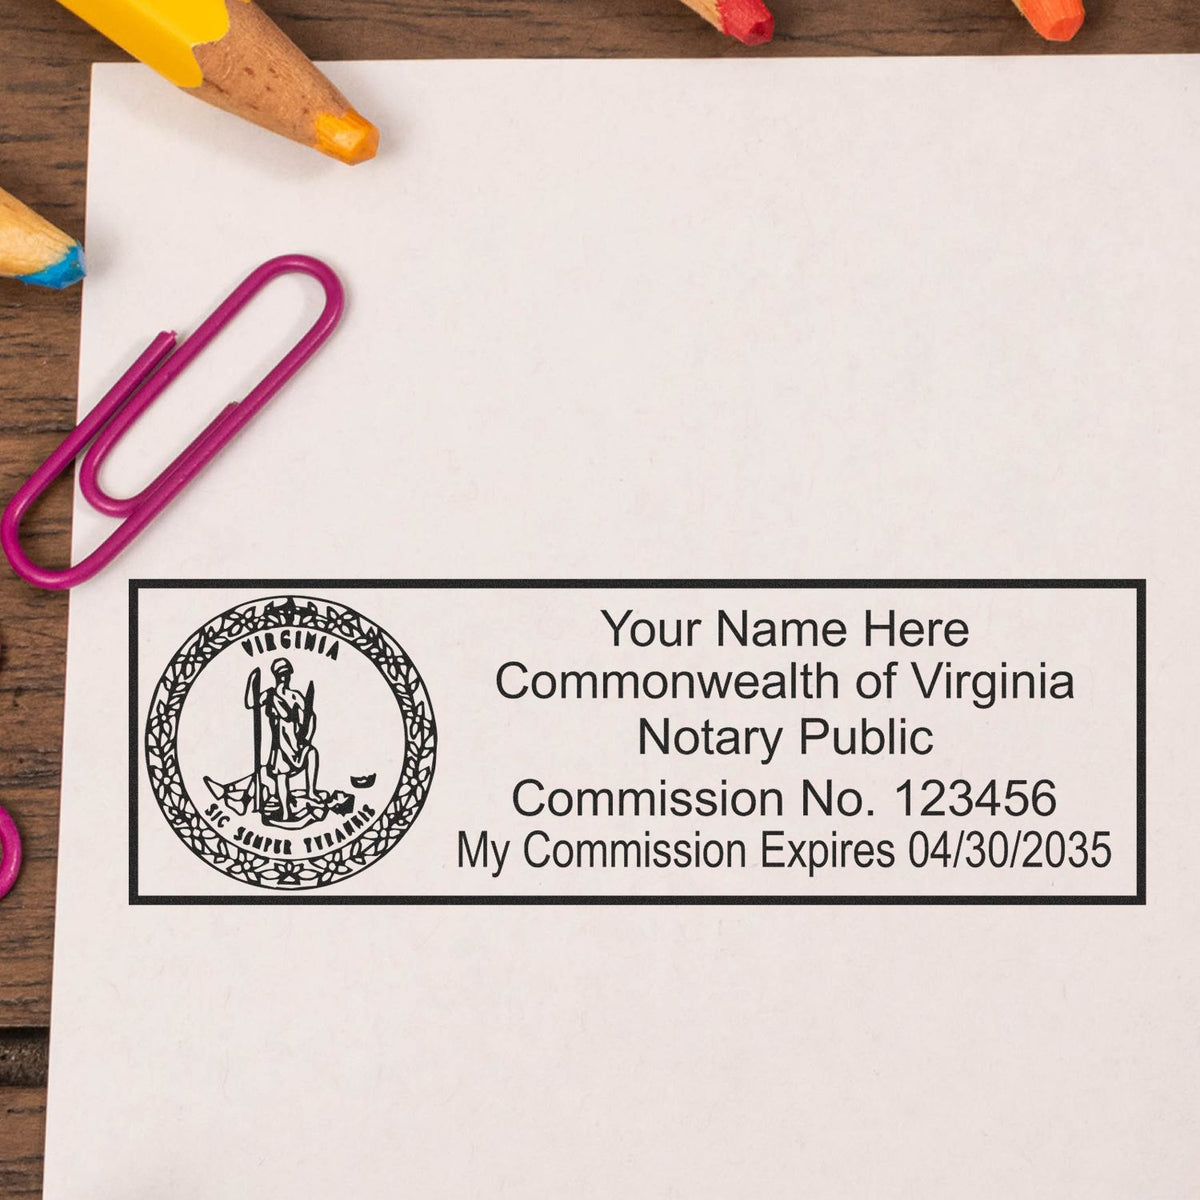 A lifestyle photo showing a stamped image of the Heavy-Duty Virginia Rectangular Notary Stamp on a piece of paper